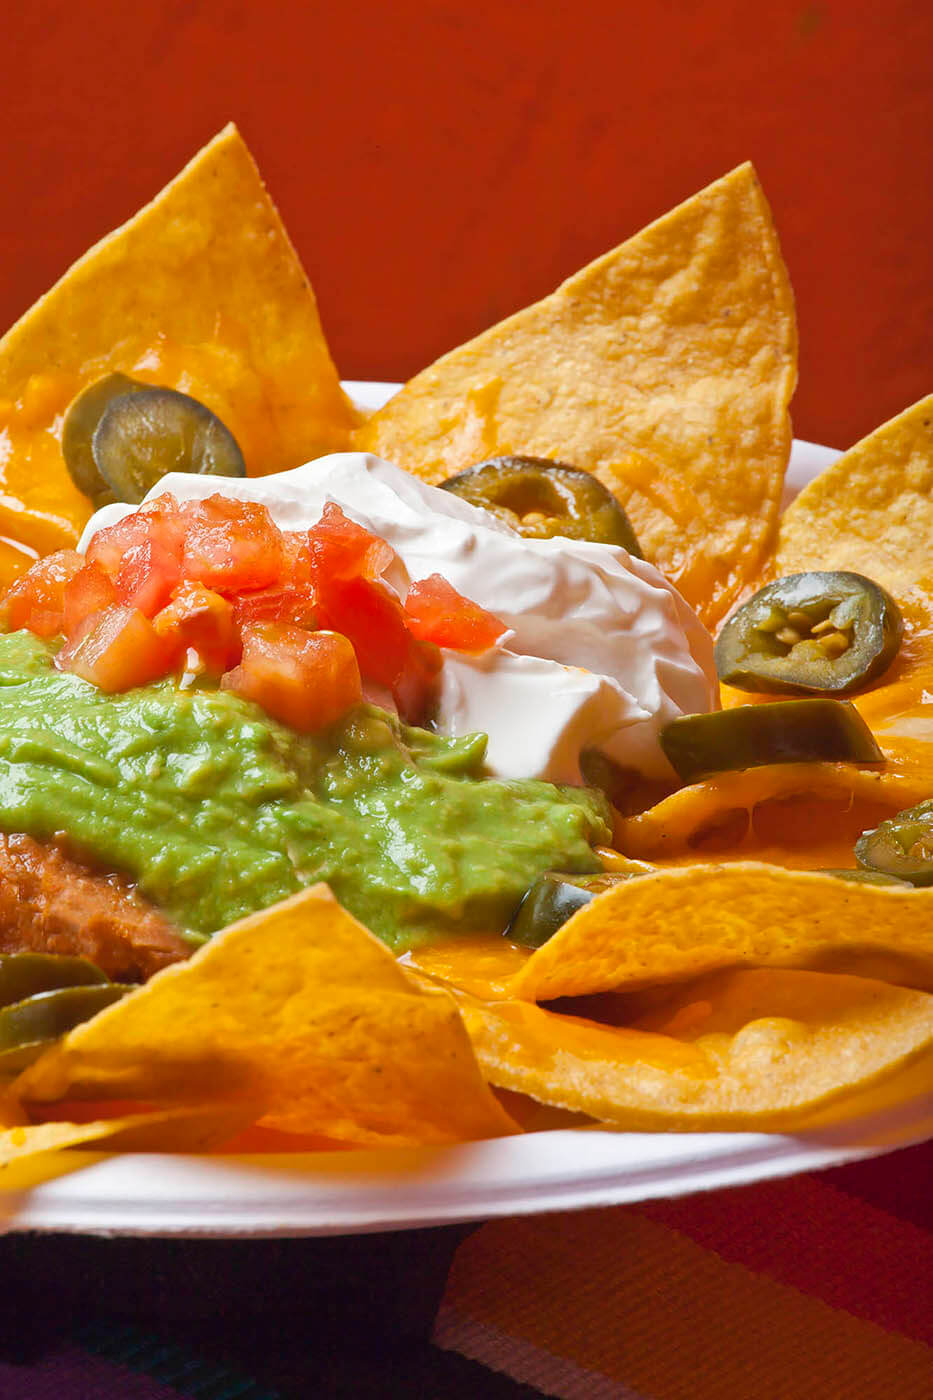 Guacamole, salsa and chips photographed for Taqueria de Valle restaurant. Food photograph by Craig Lovell.